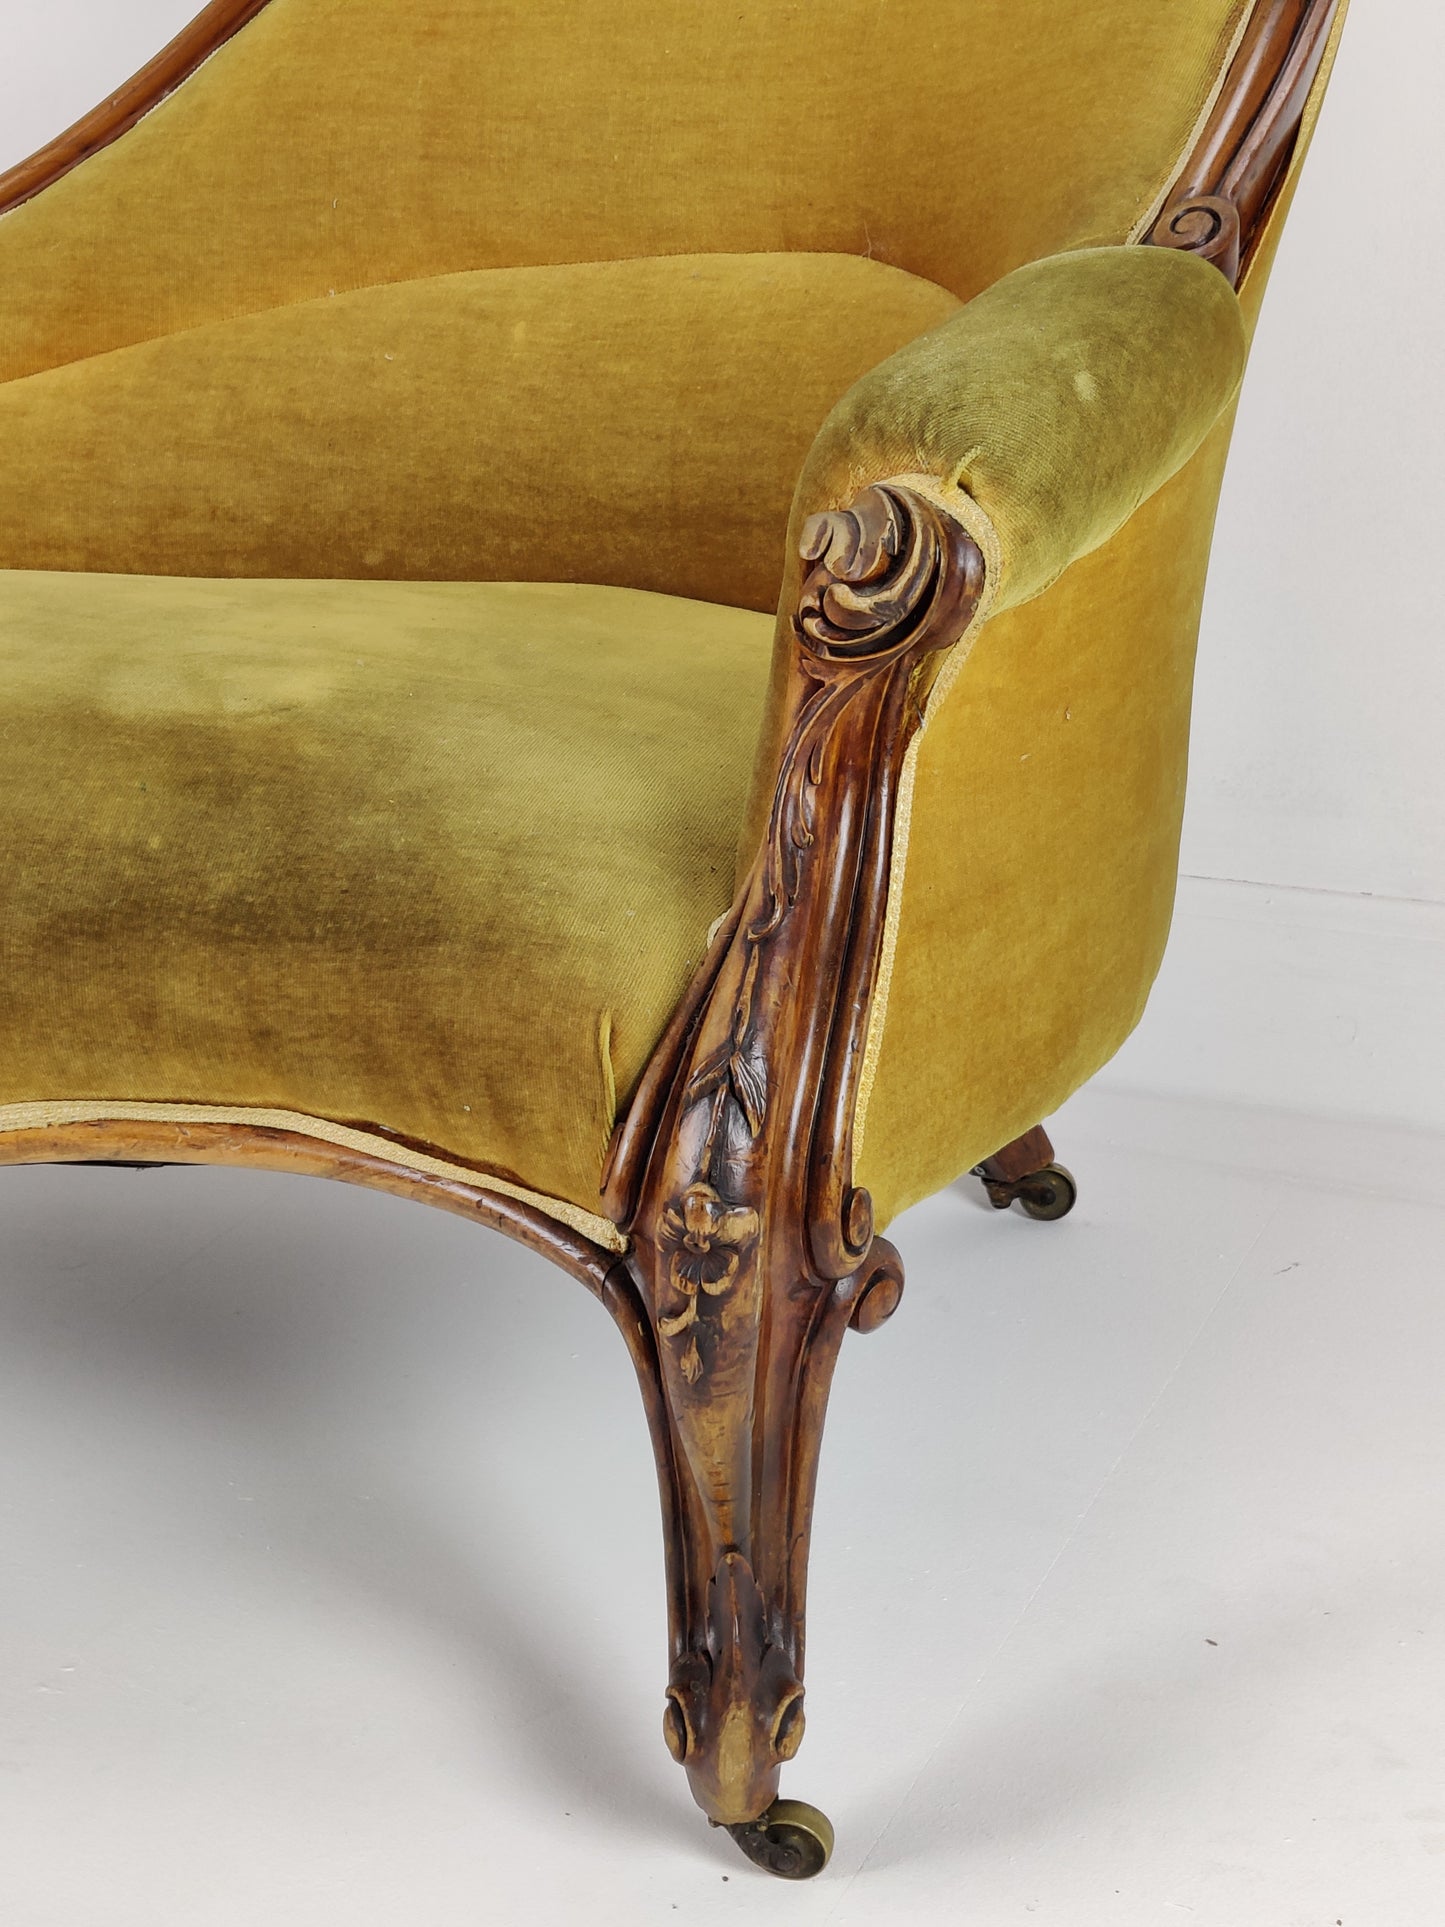 Carved walnut chaise longue